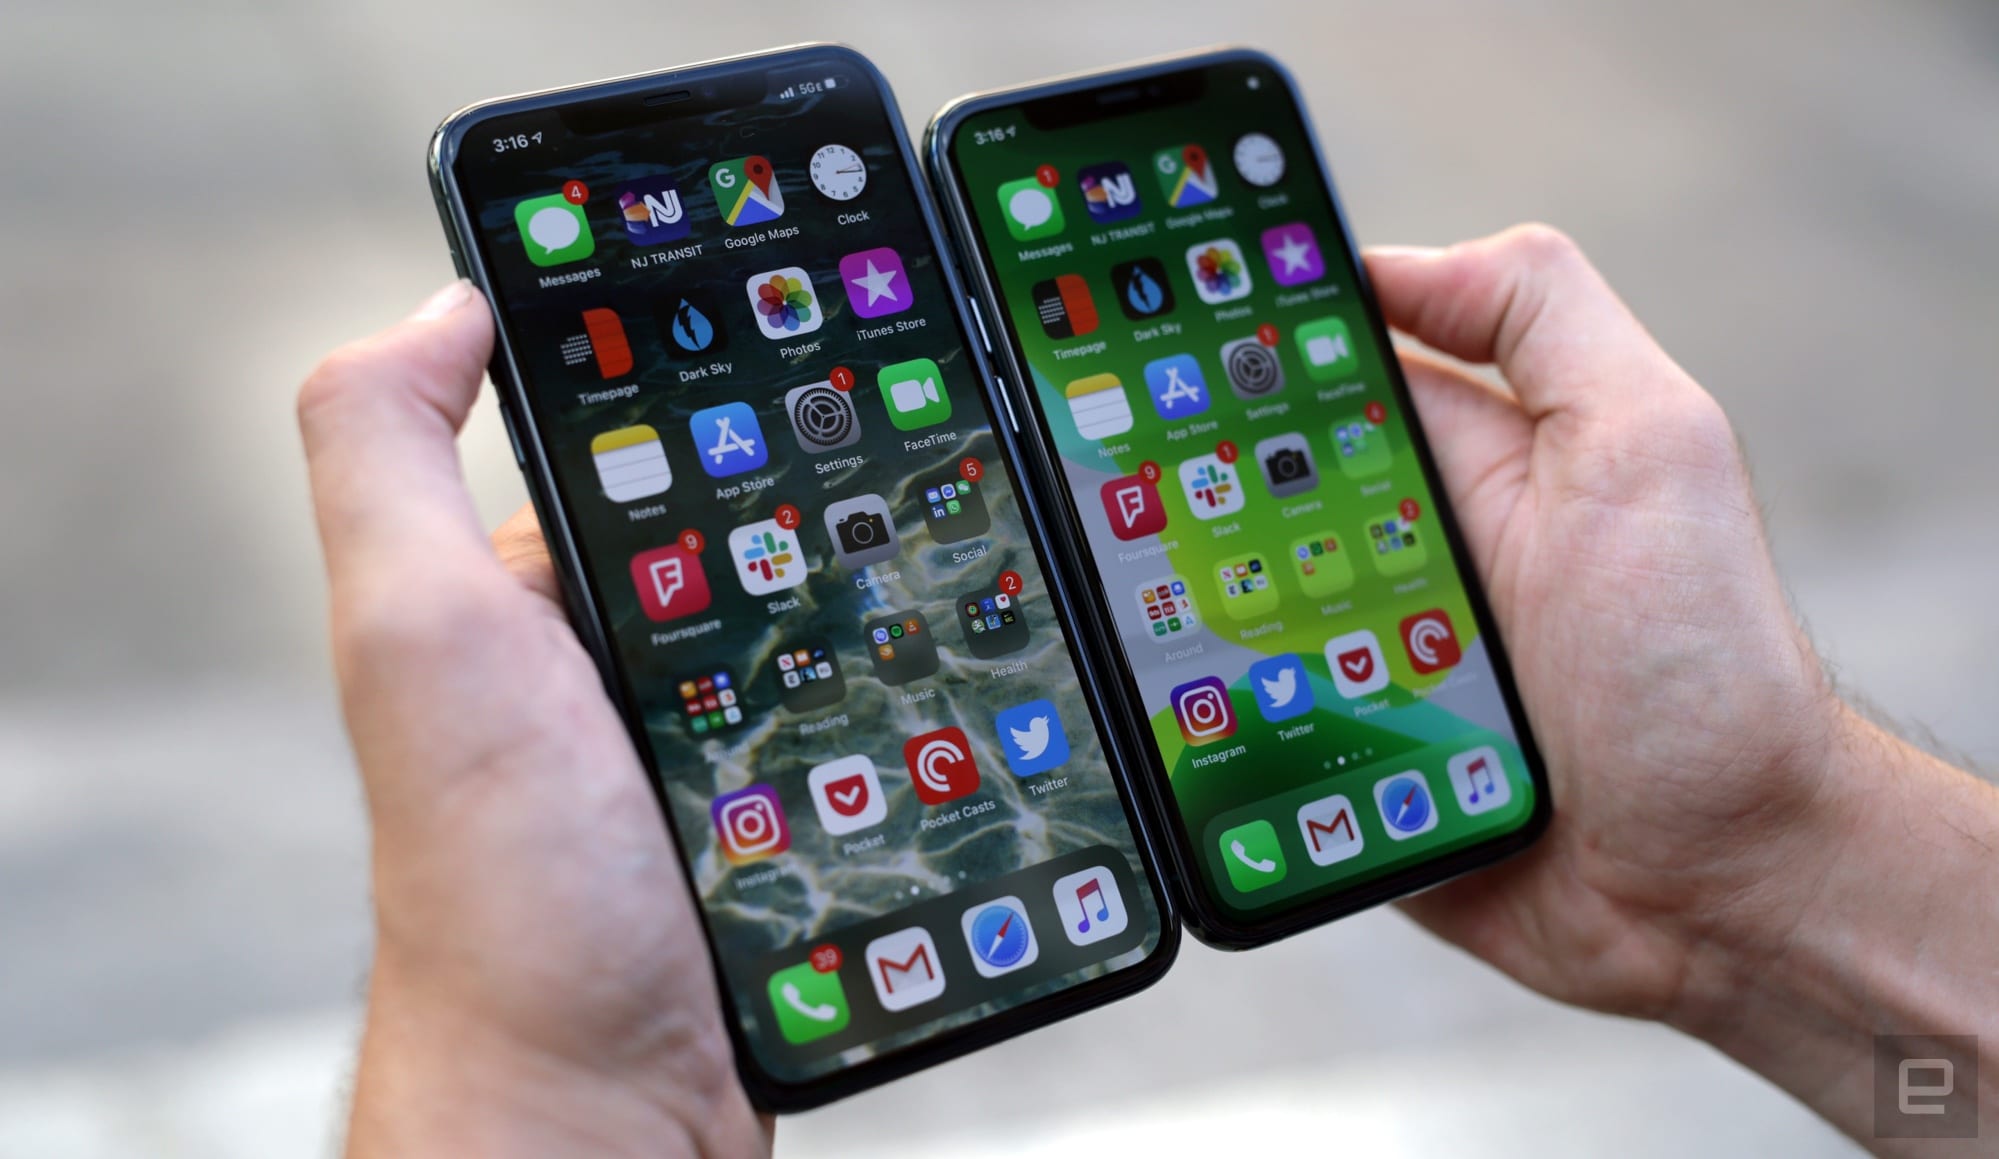 Apple iPhone 11 Pro and Pro Max review: Better, but not groundbreaking ...